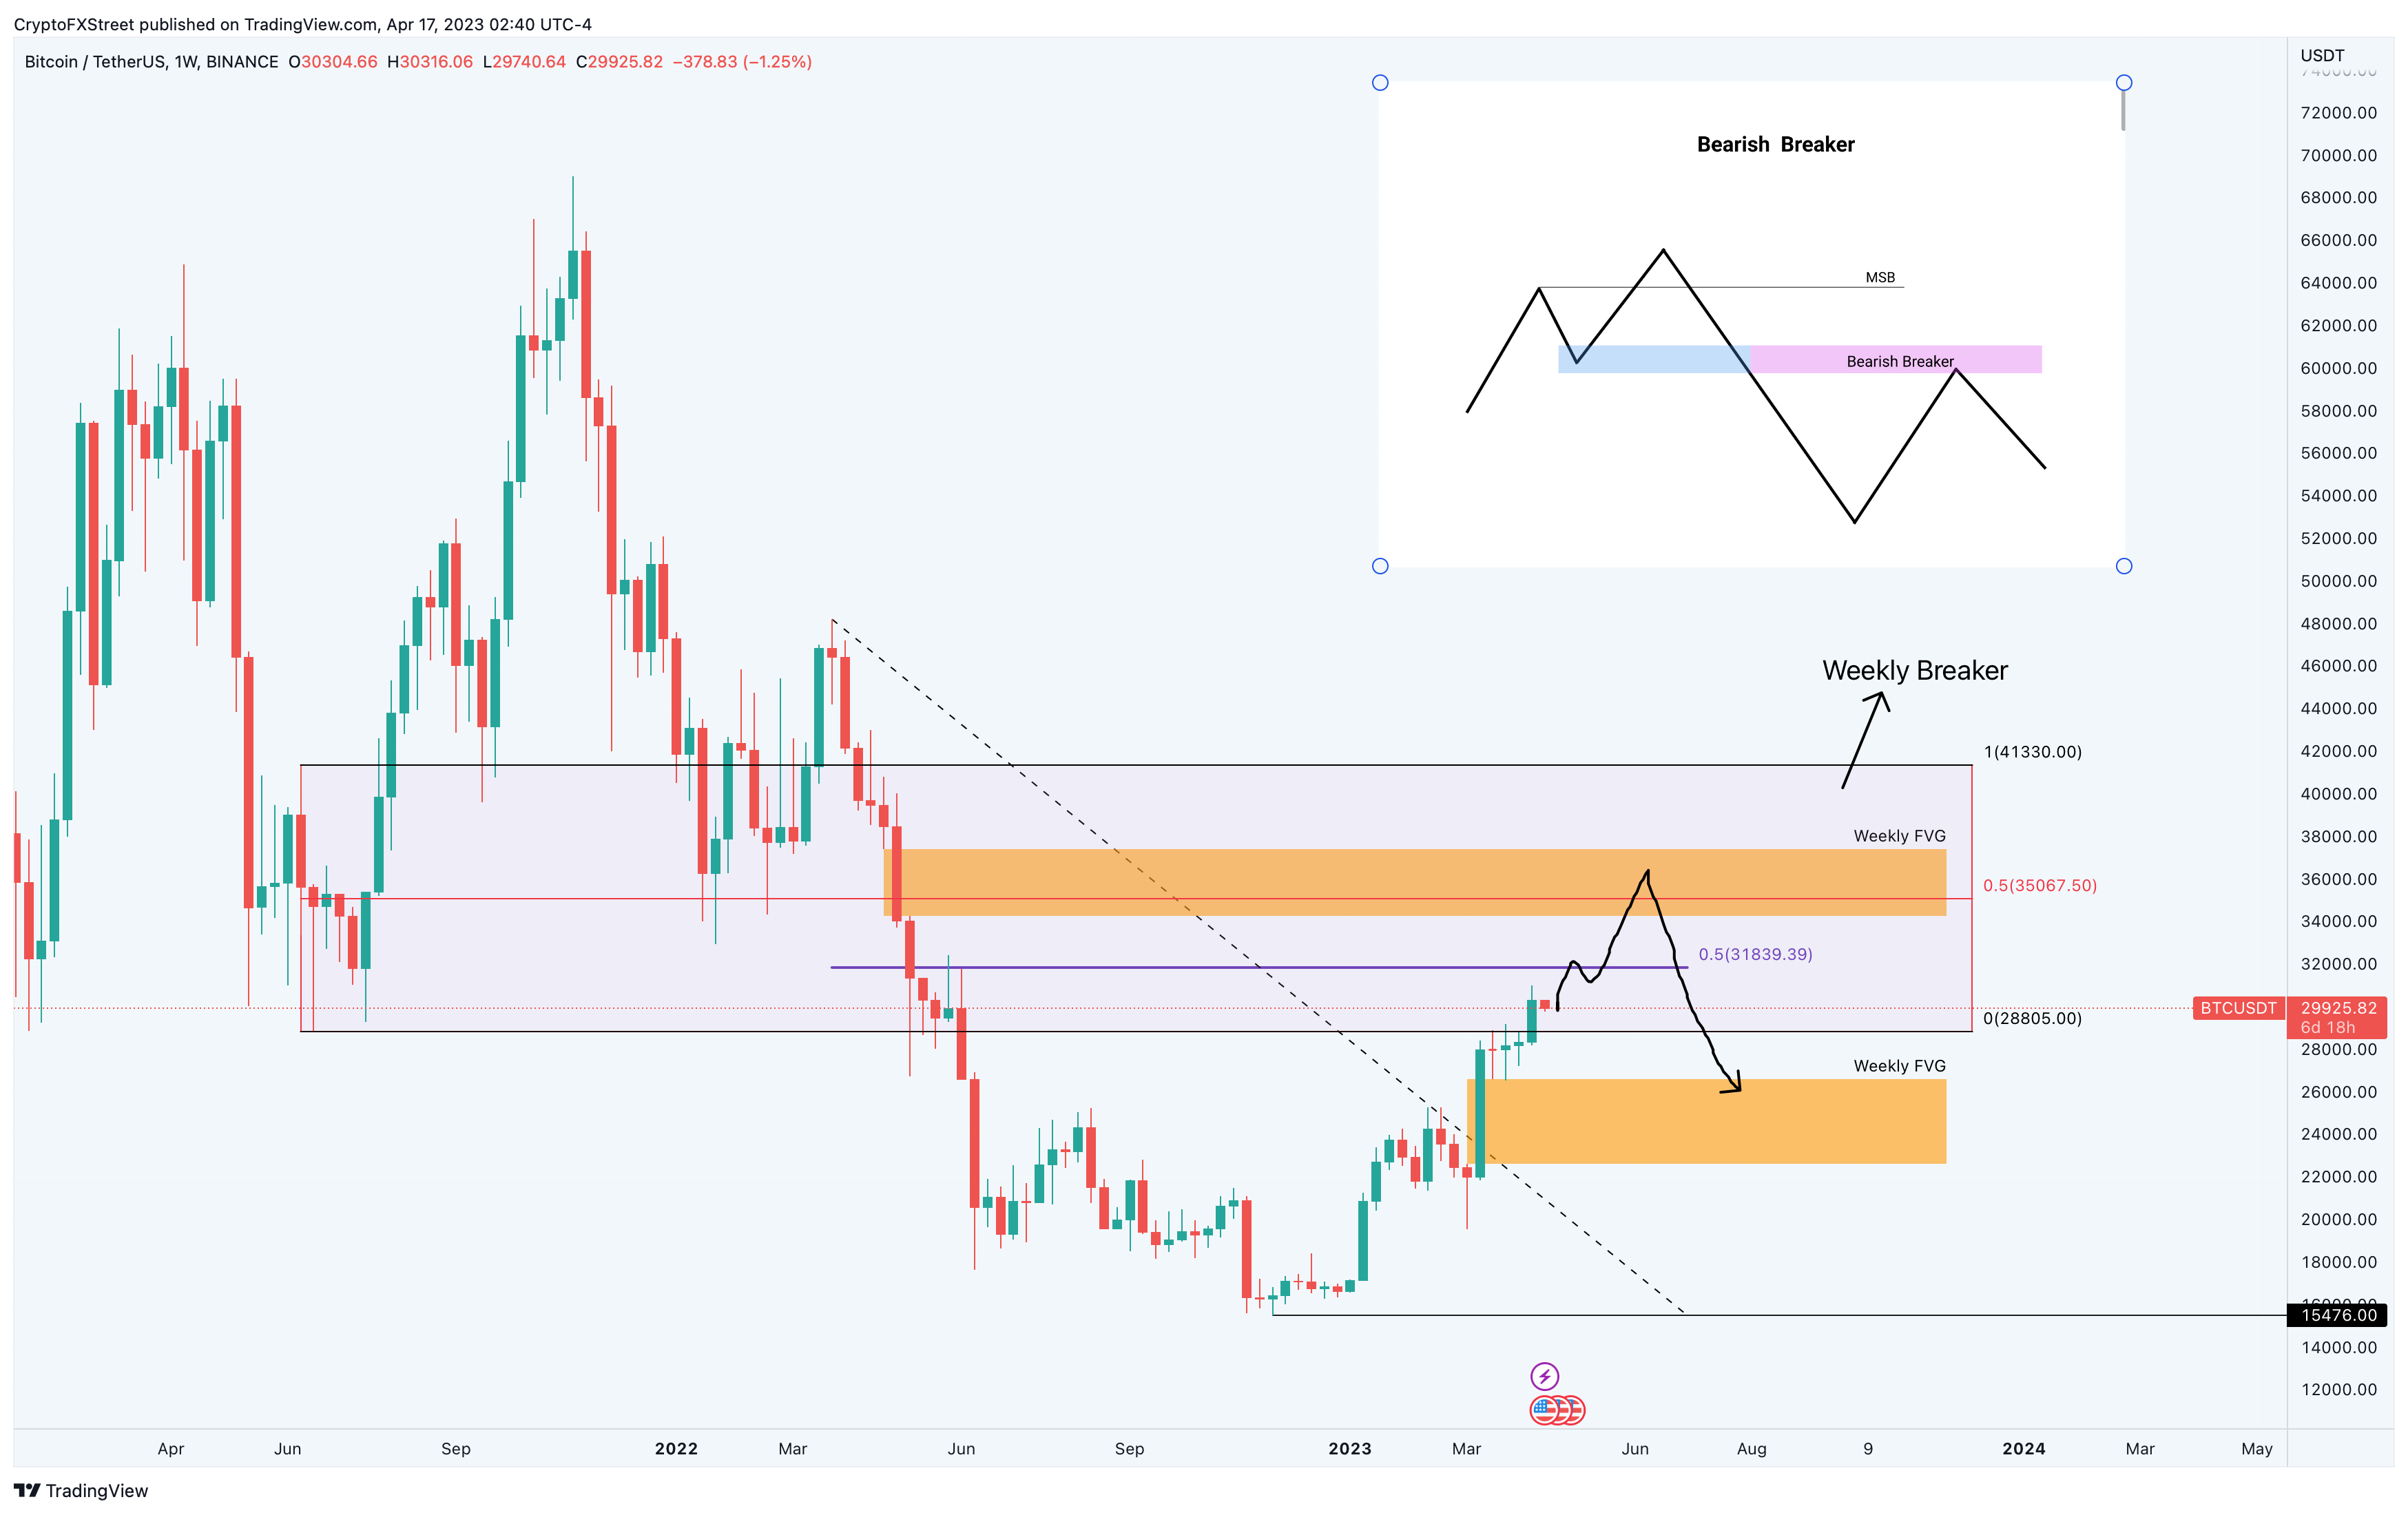 Also read: Bitcoin Weekly Forecast: What to expect from BTC after overcoming $30,000